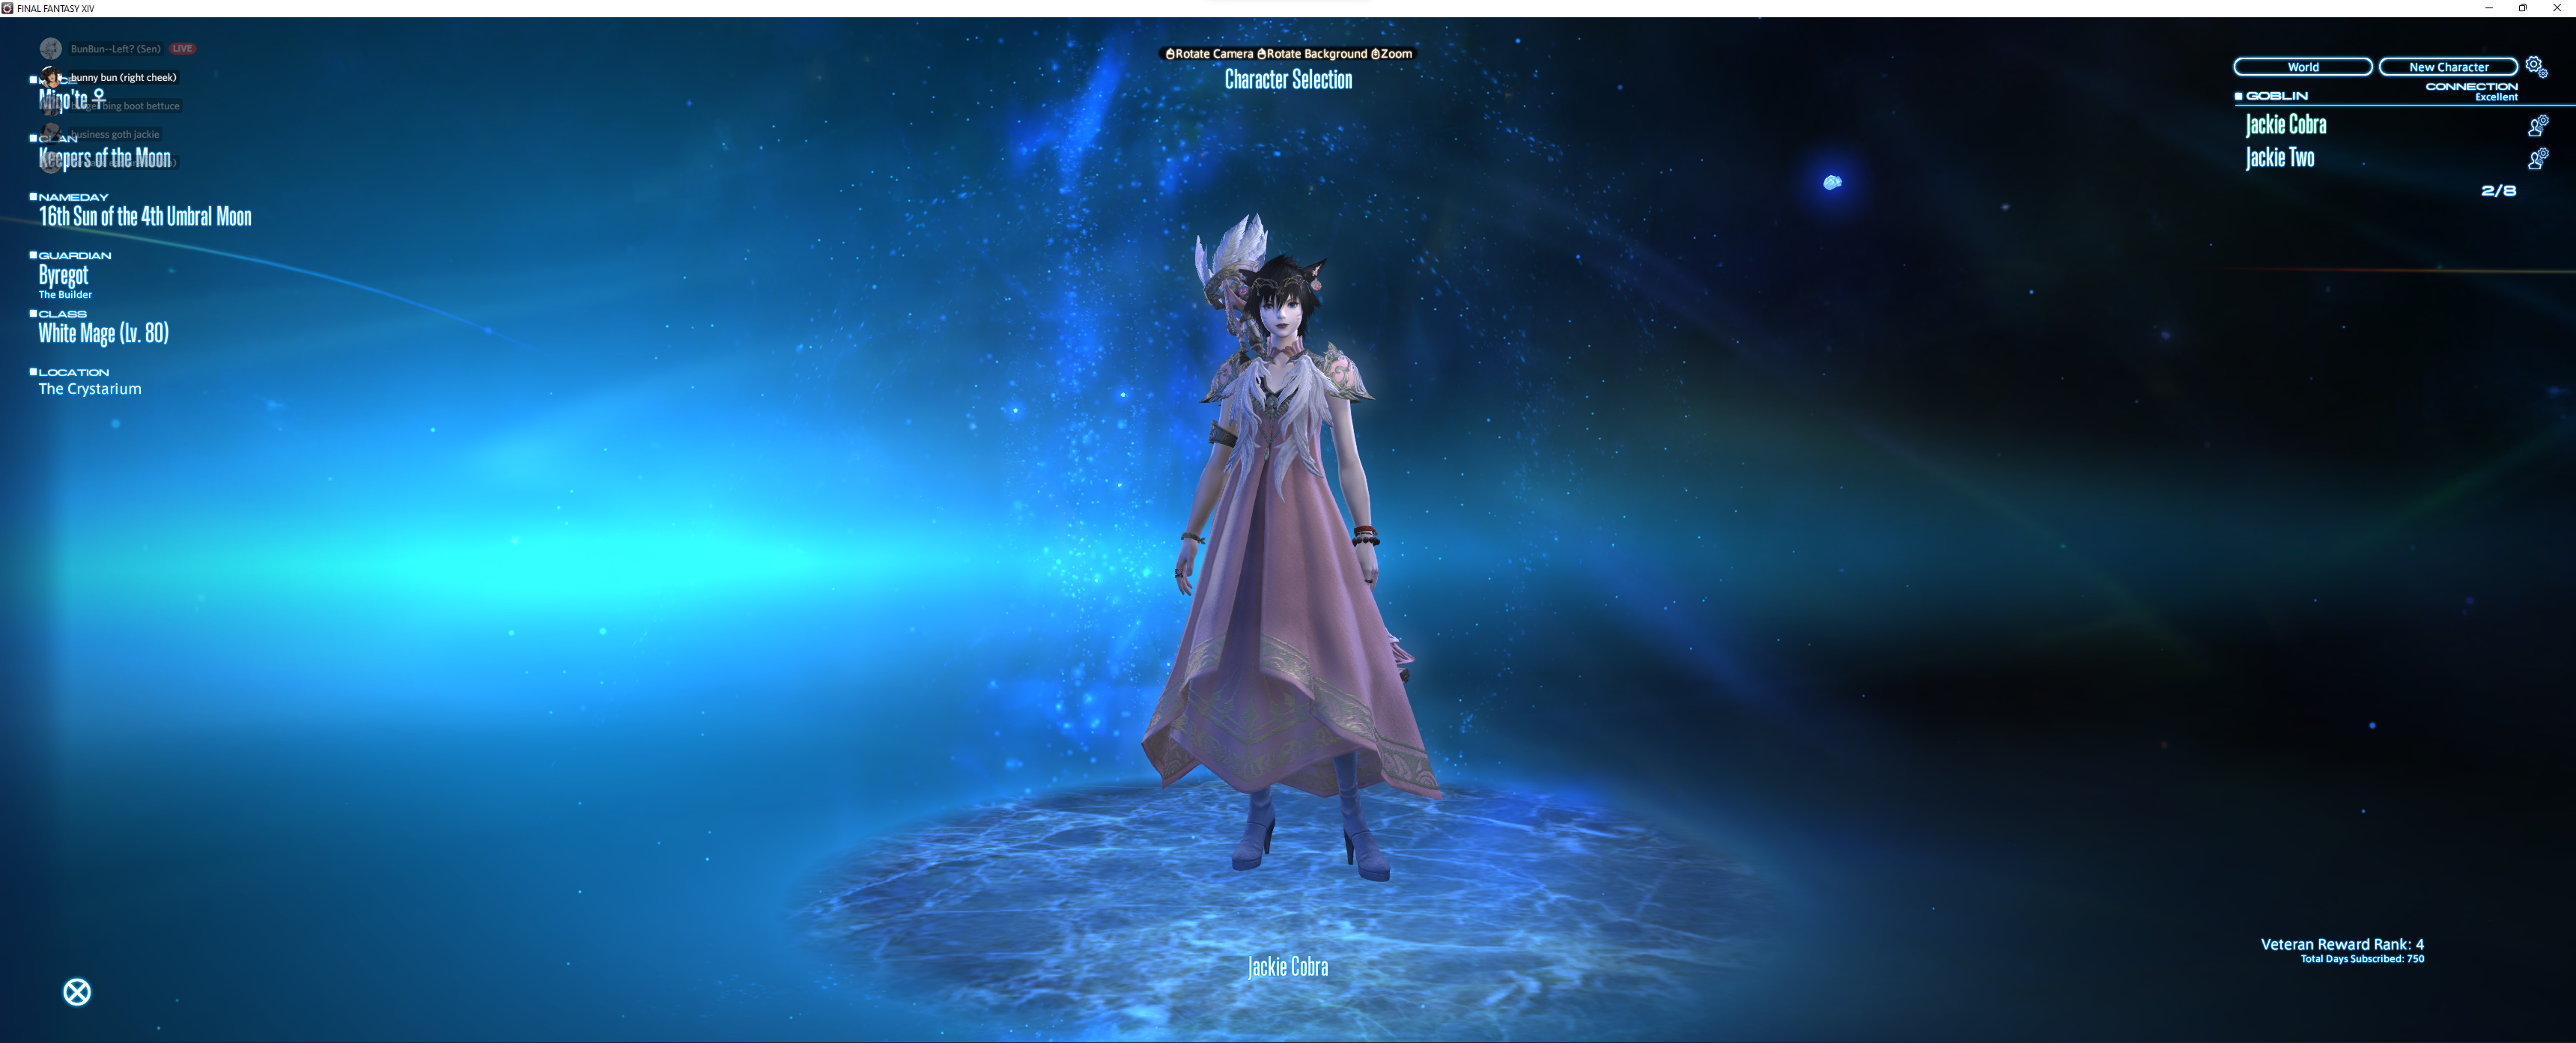 Jackie's log in screen in FFXIV, shes wearing a really cute pink dress that she got because she suffered through Titan Savage.